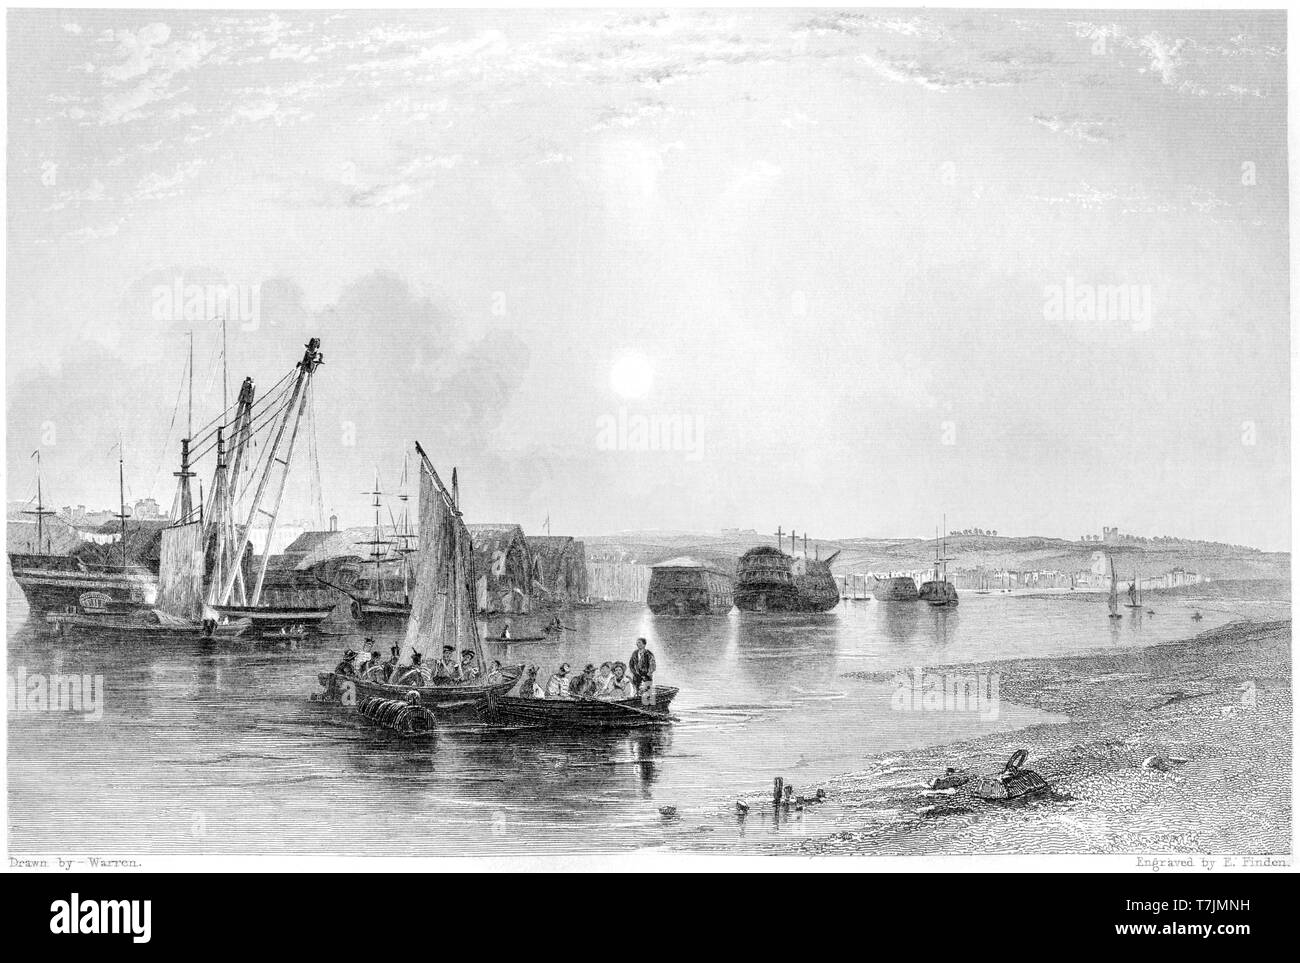 An engraving of Chatham with the Dockyard scanned at high resolution from a book published in 1842.  Believed copyright free. Stock Photo